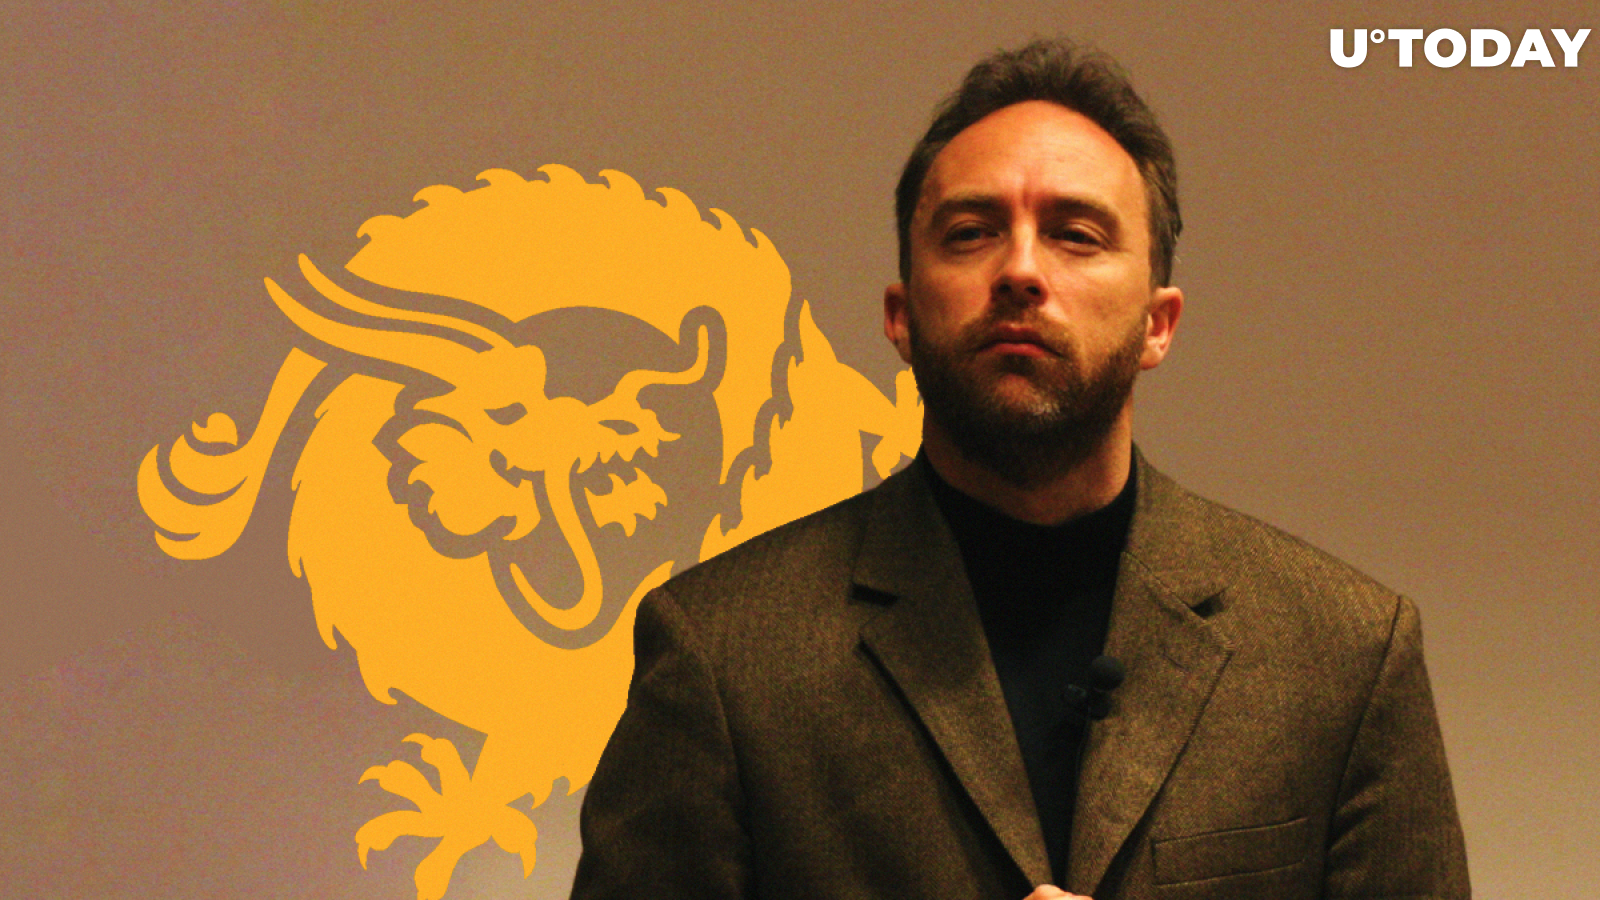 Bitcoin SV (BSV) Not Suitable for Wikipedia, Says Founder Jimmy Wales